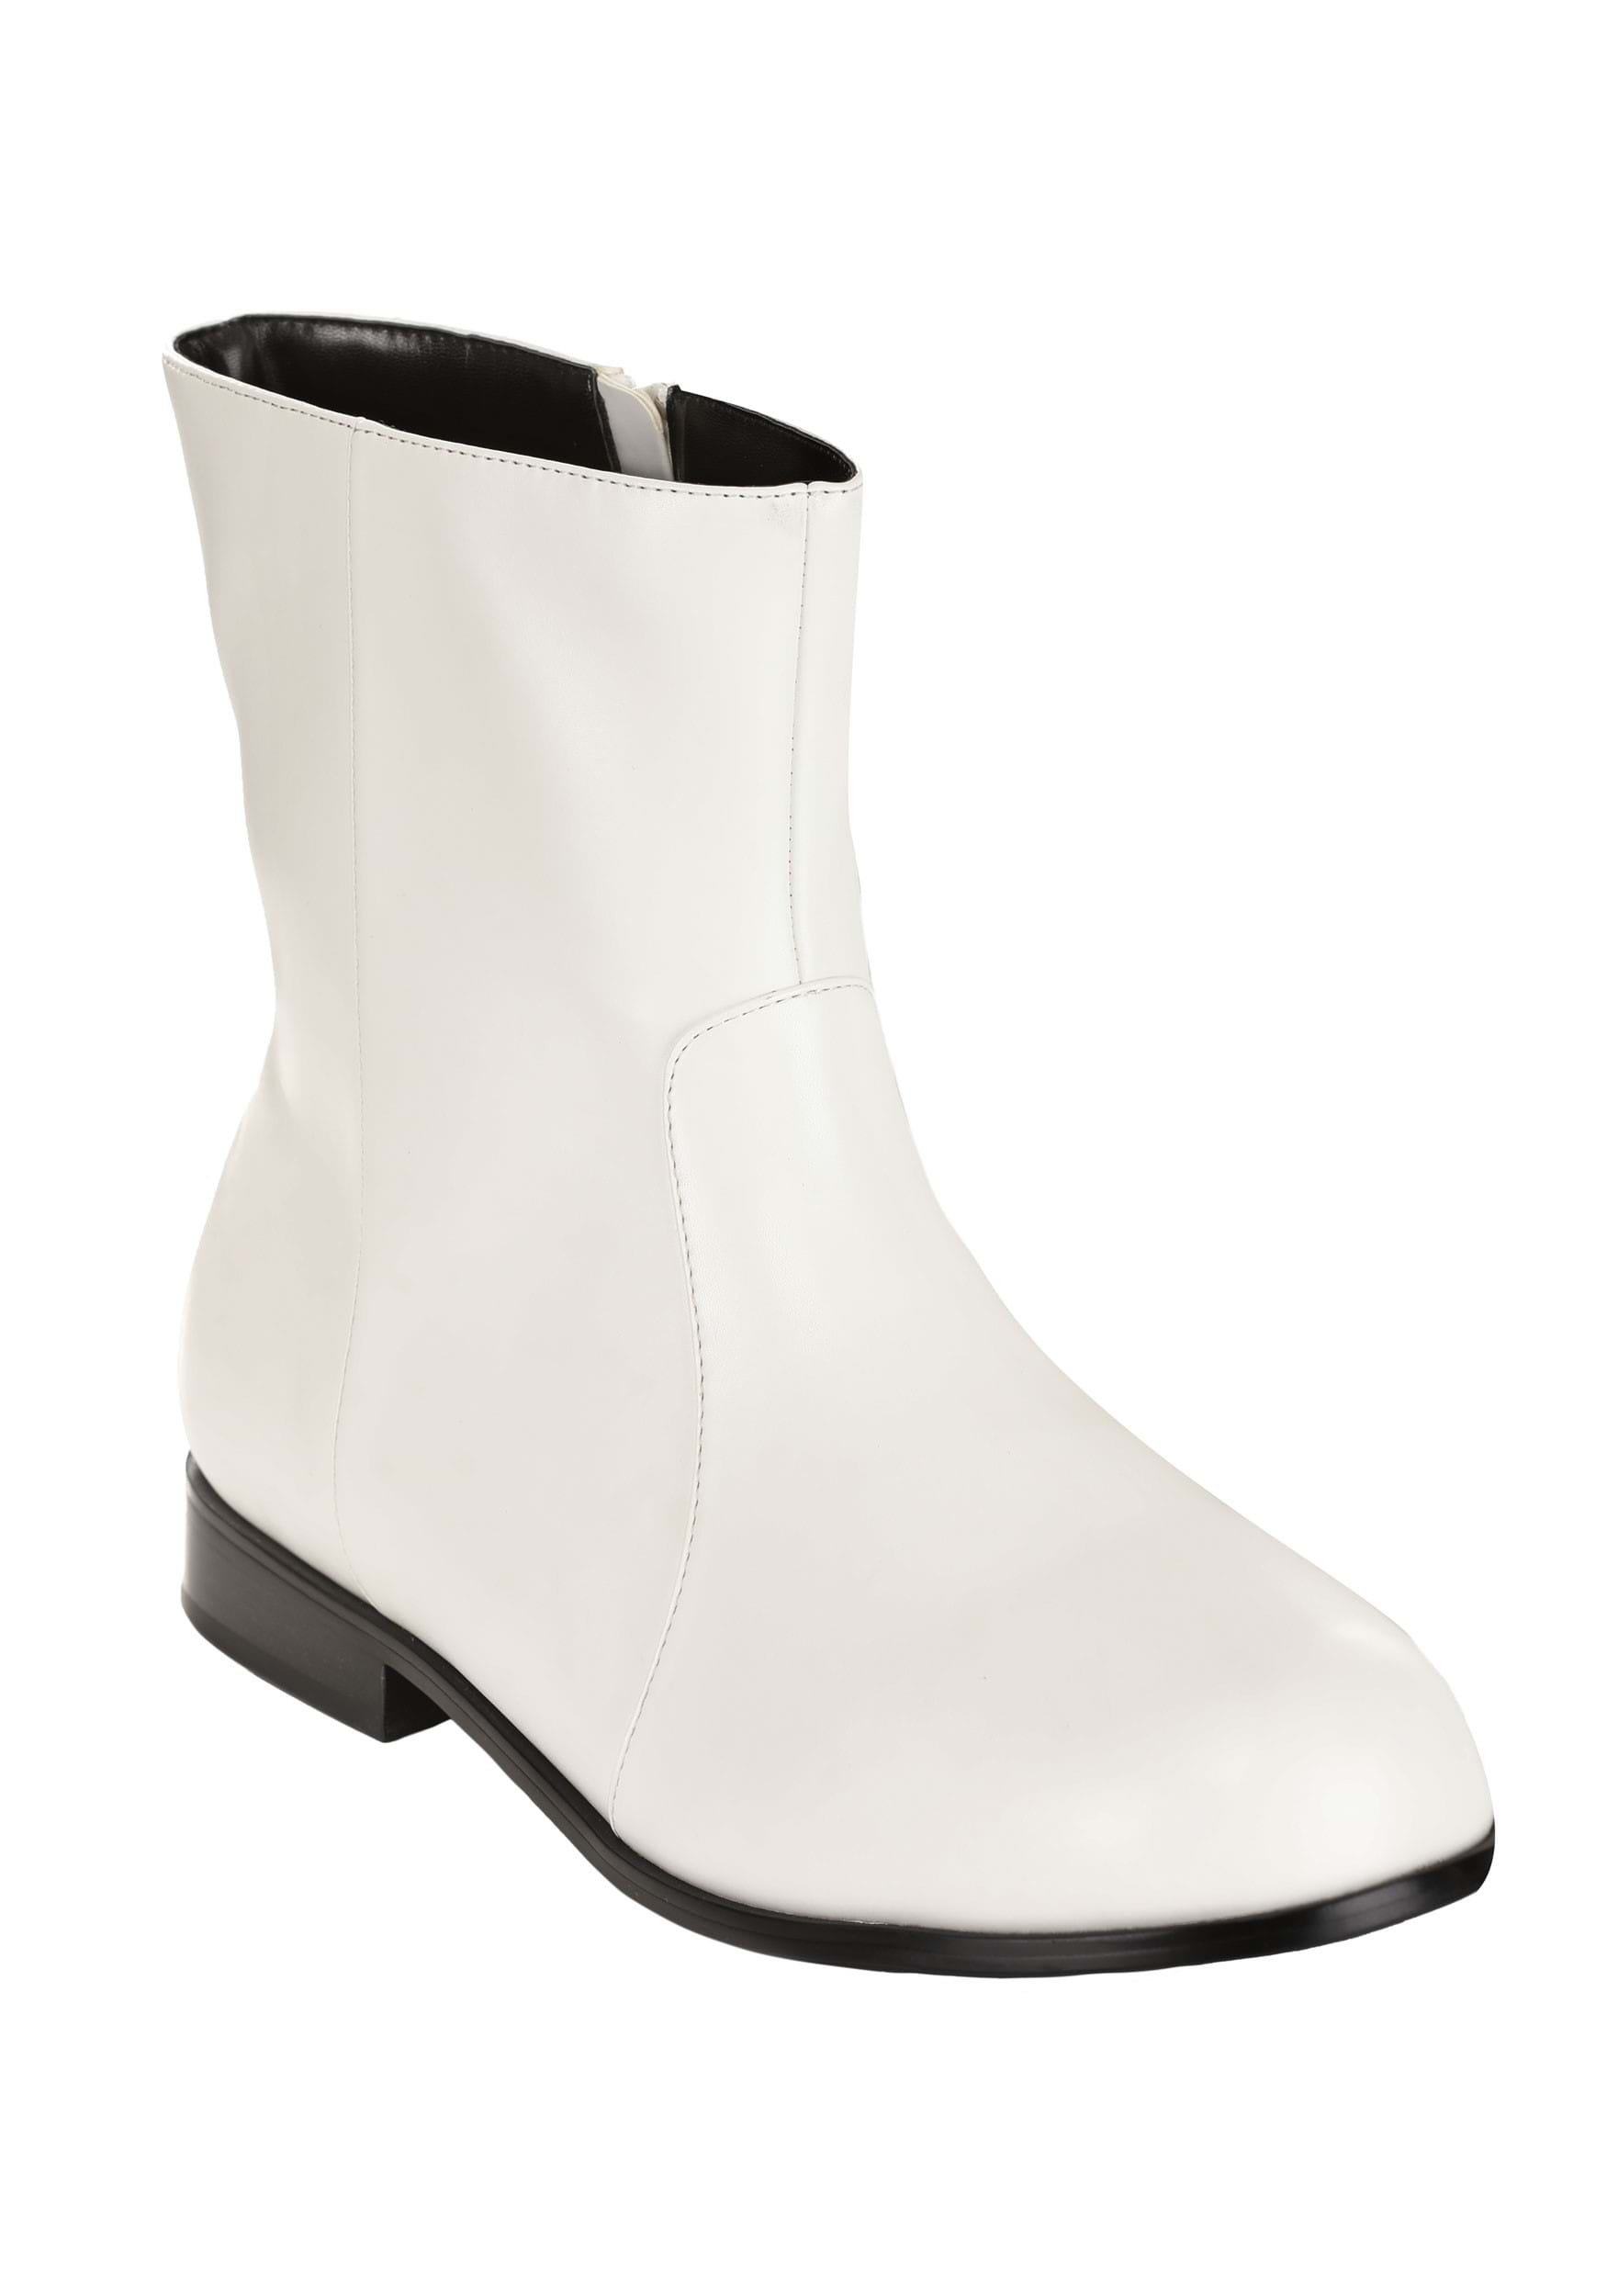 https://images.halloweencostumes.ca/products/76947/1-1/adult-white-70s-boots.jpg